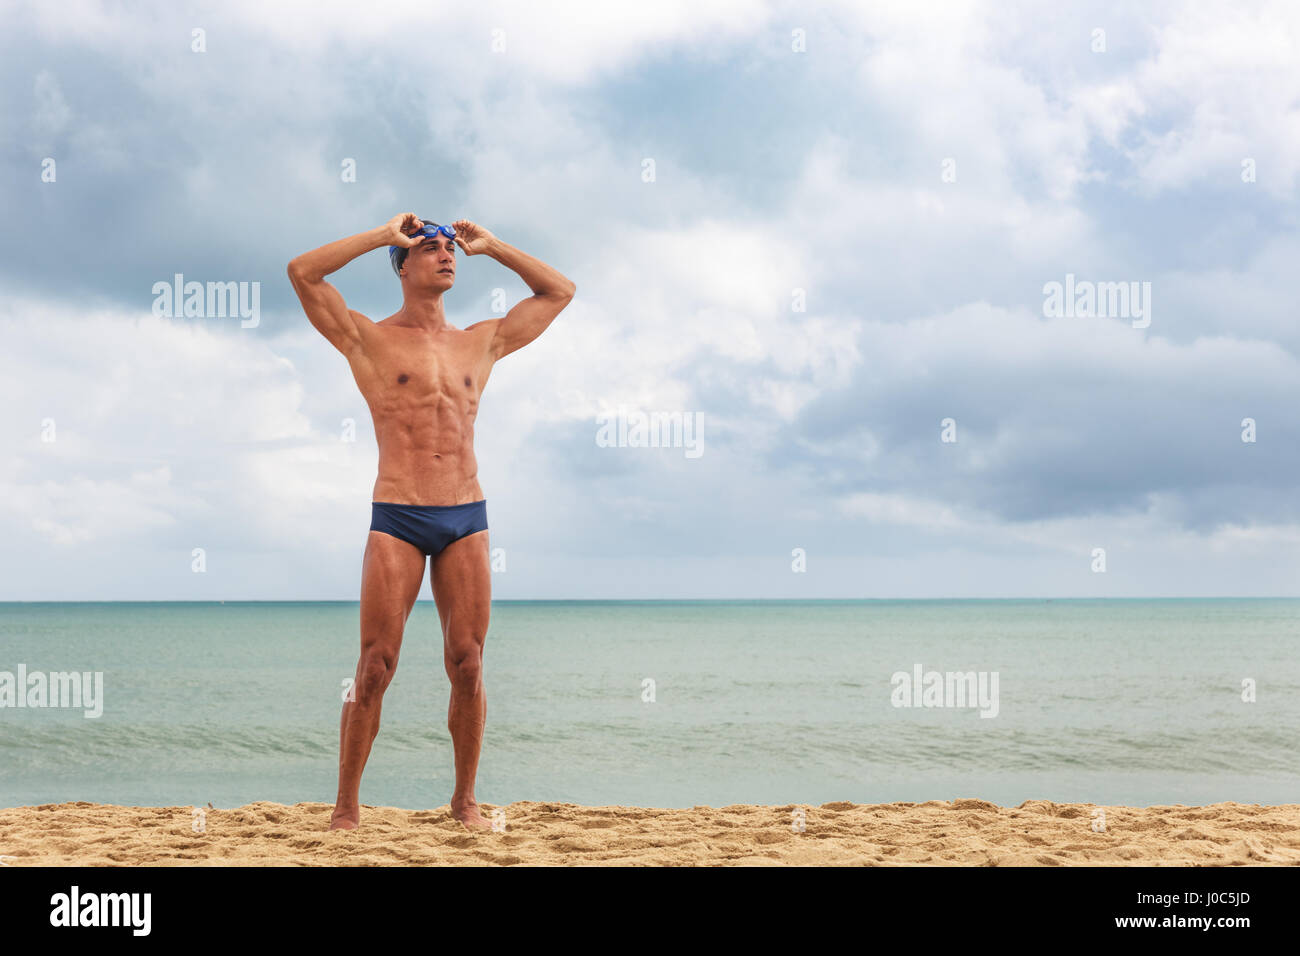 Muscular male swimmer standing on beach putting on swimming goggles Stock Photo